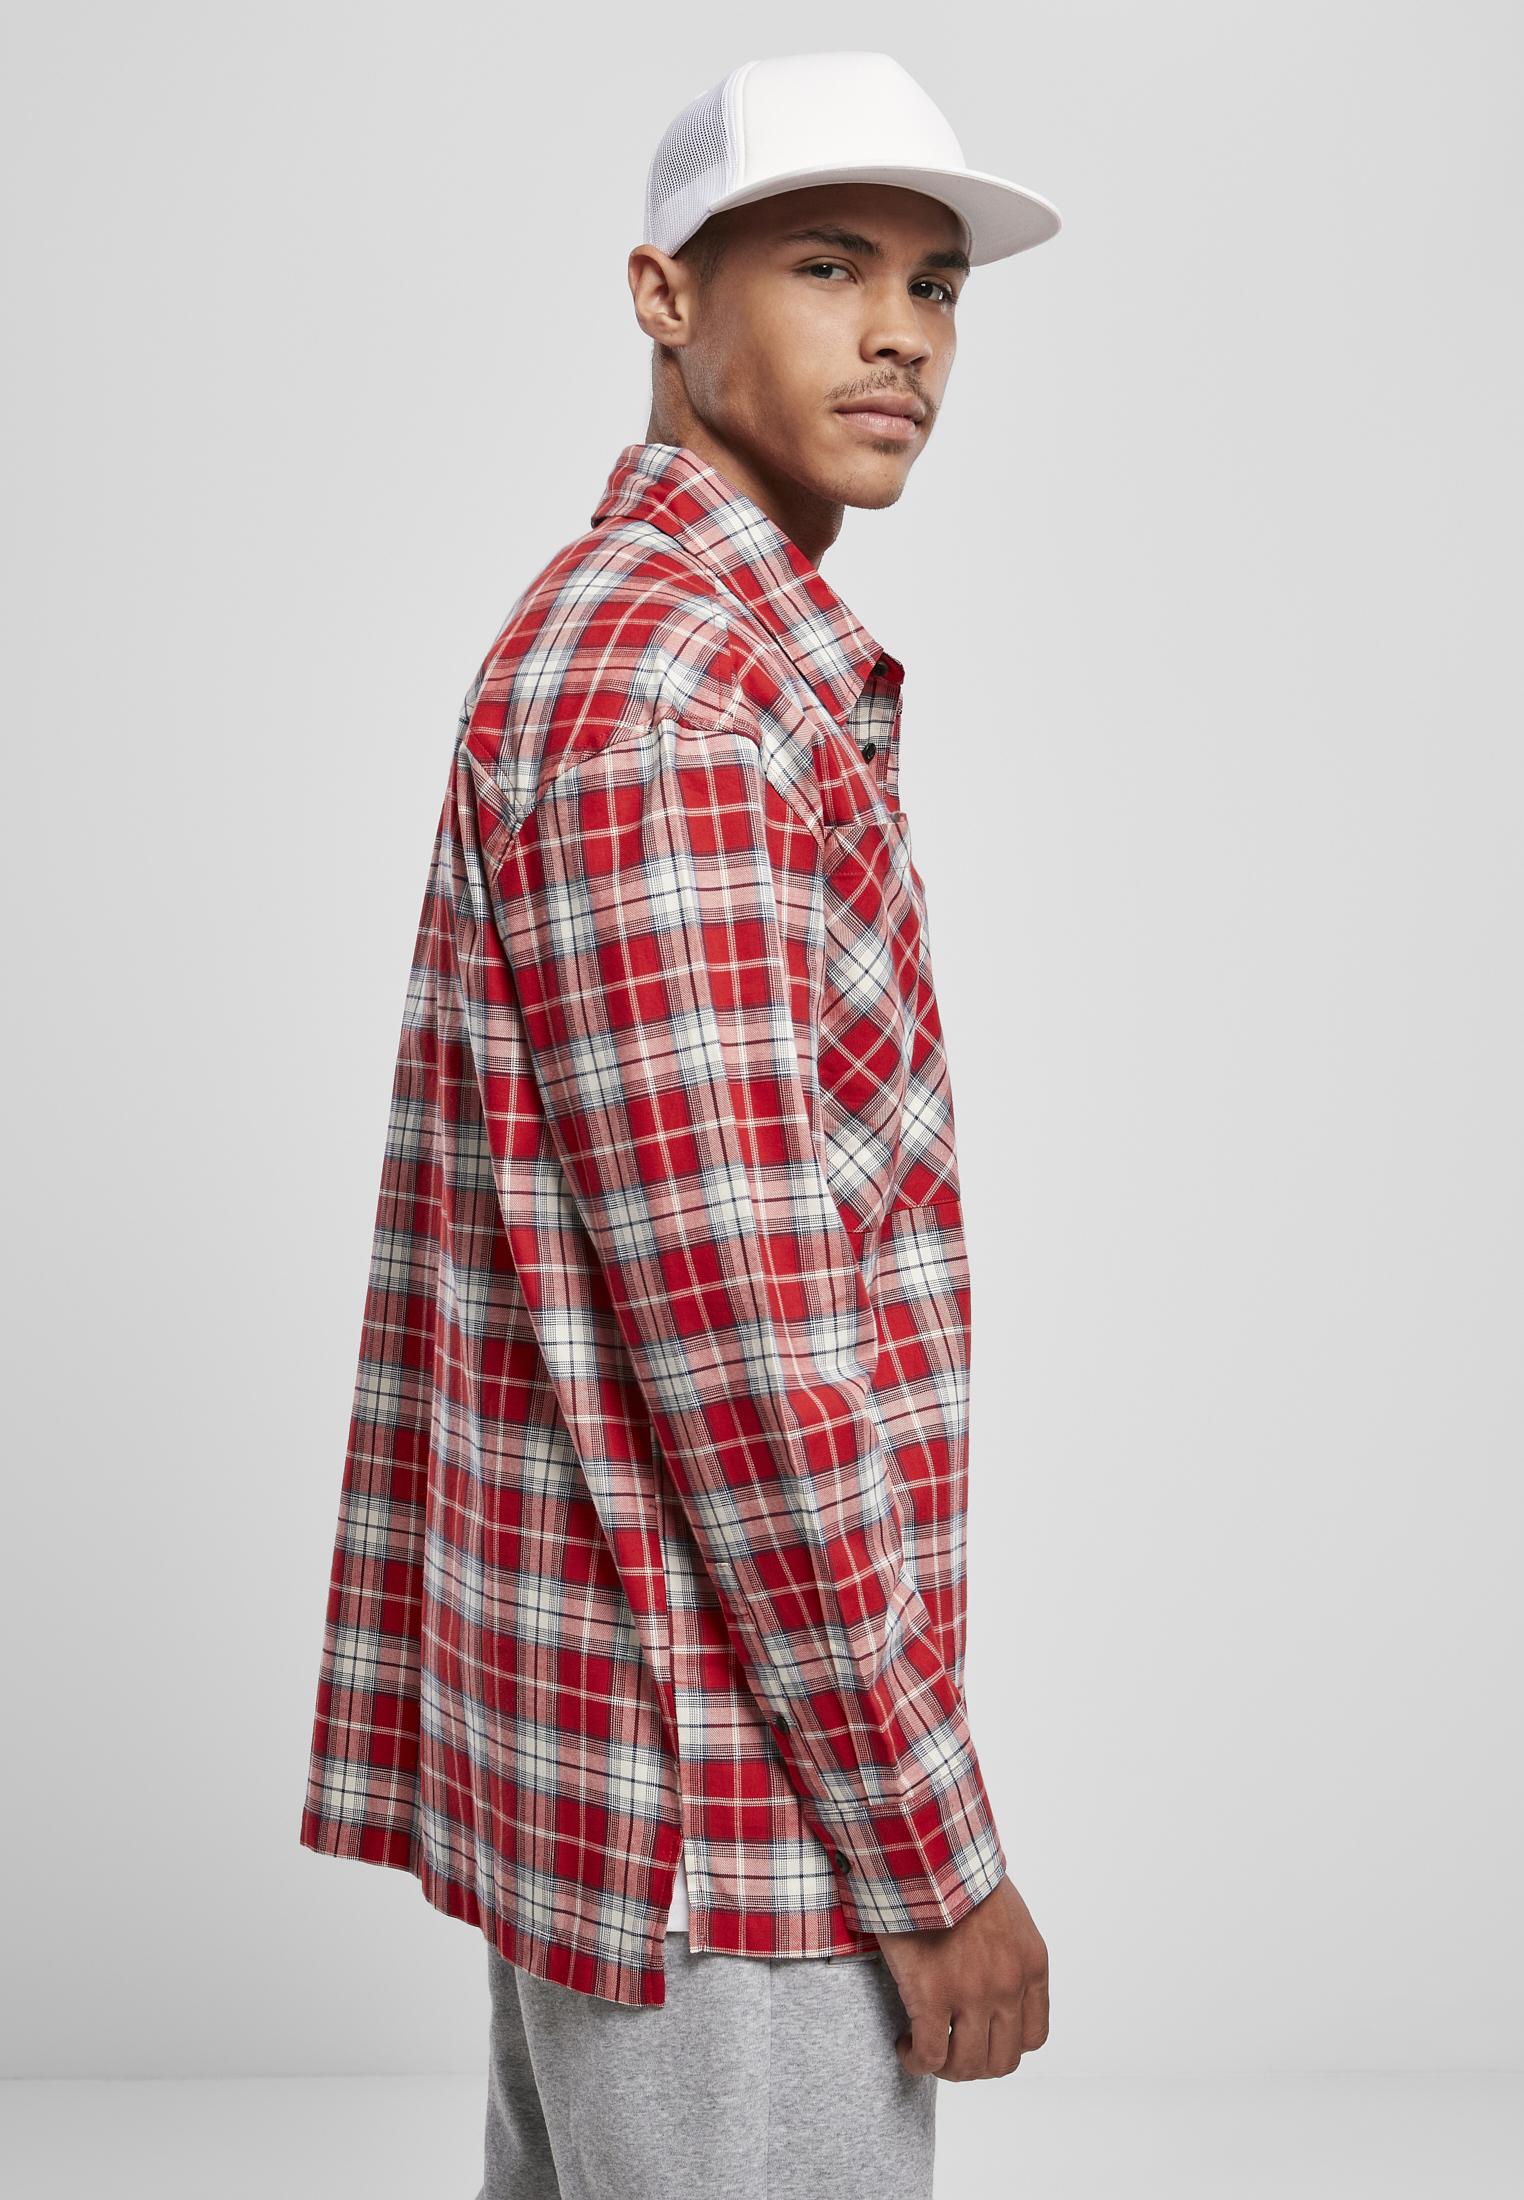 Southpole Southpole Checked Woven Shirt (Farbe: SP red / Größe: XXL)